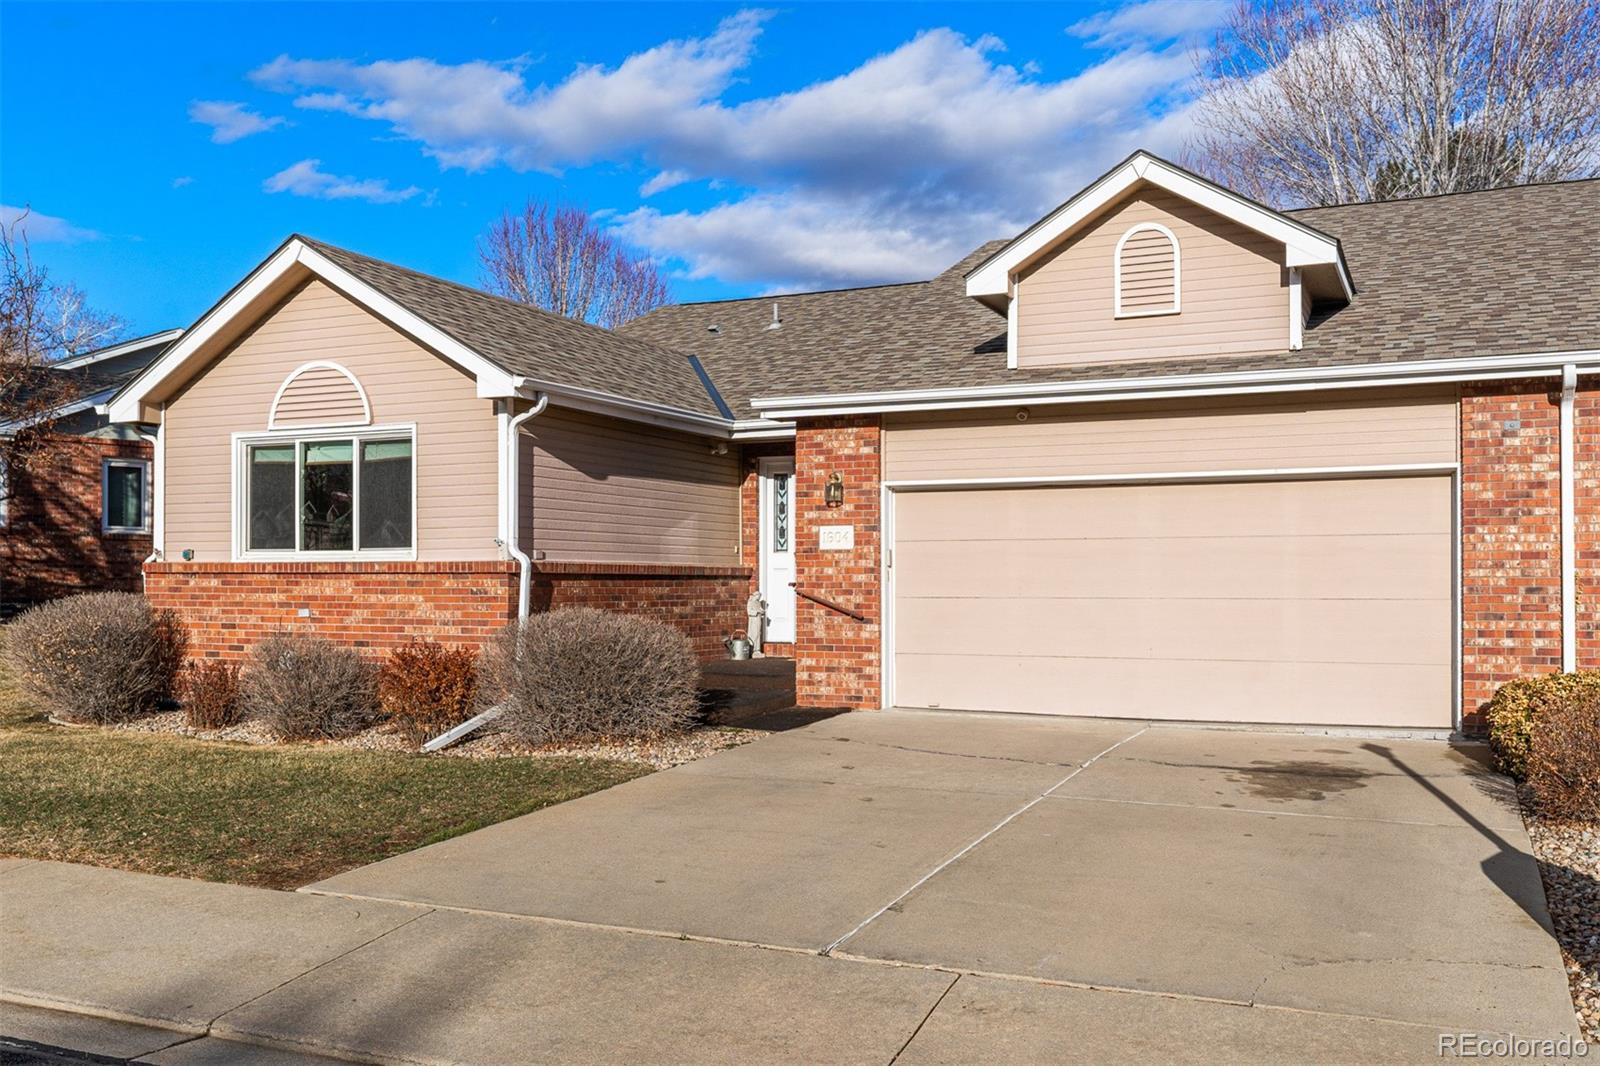 Report Image for 1604  16th Place,Longmont, Colorado